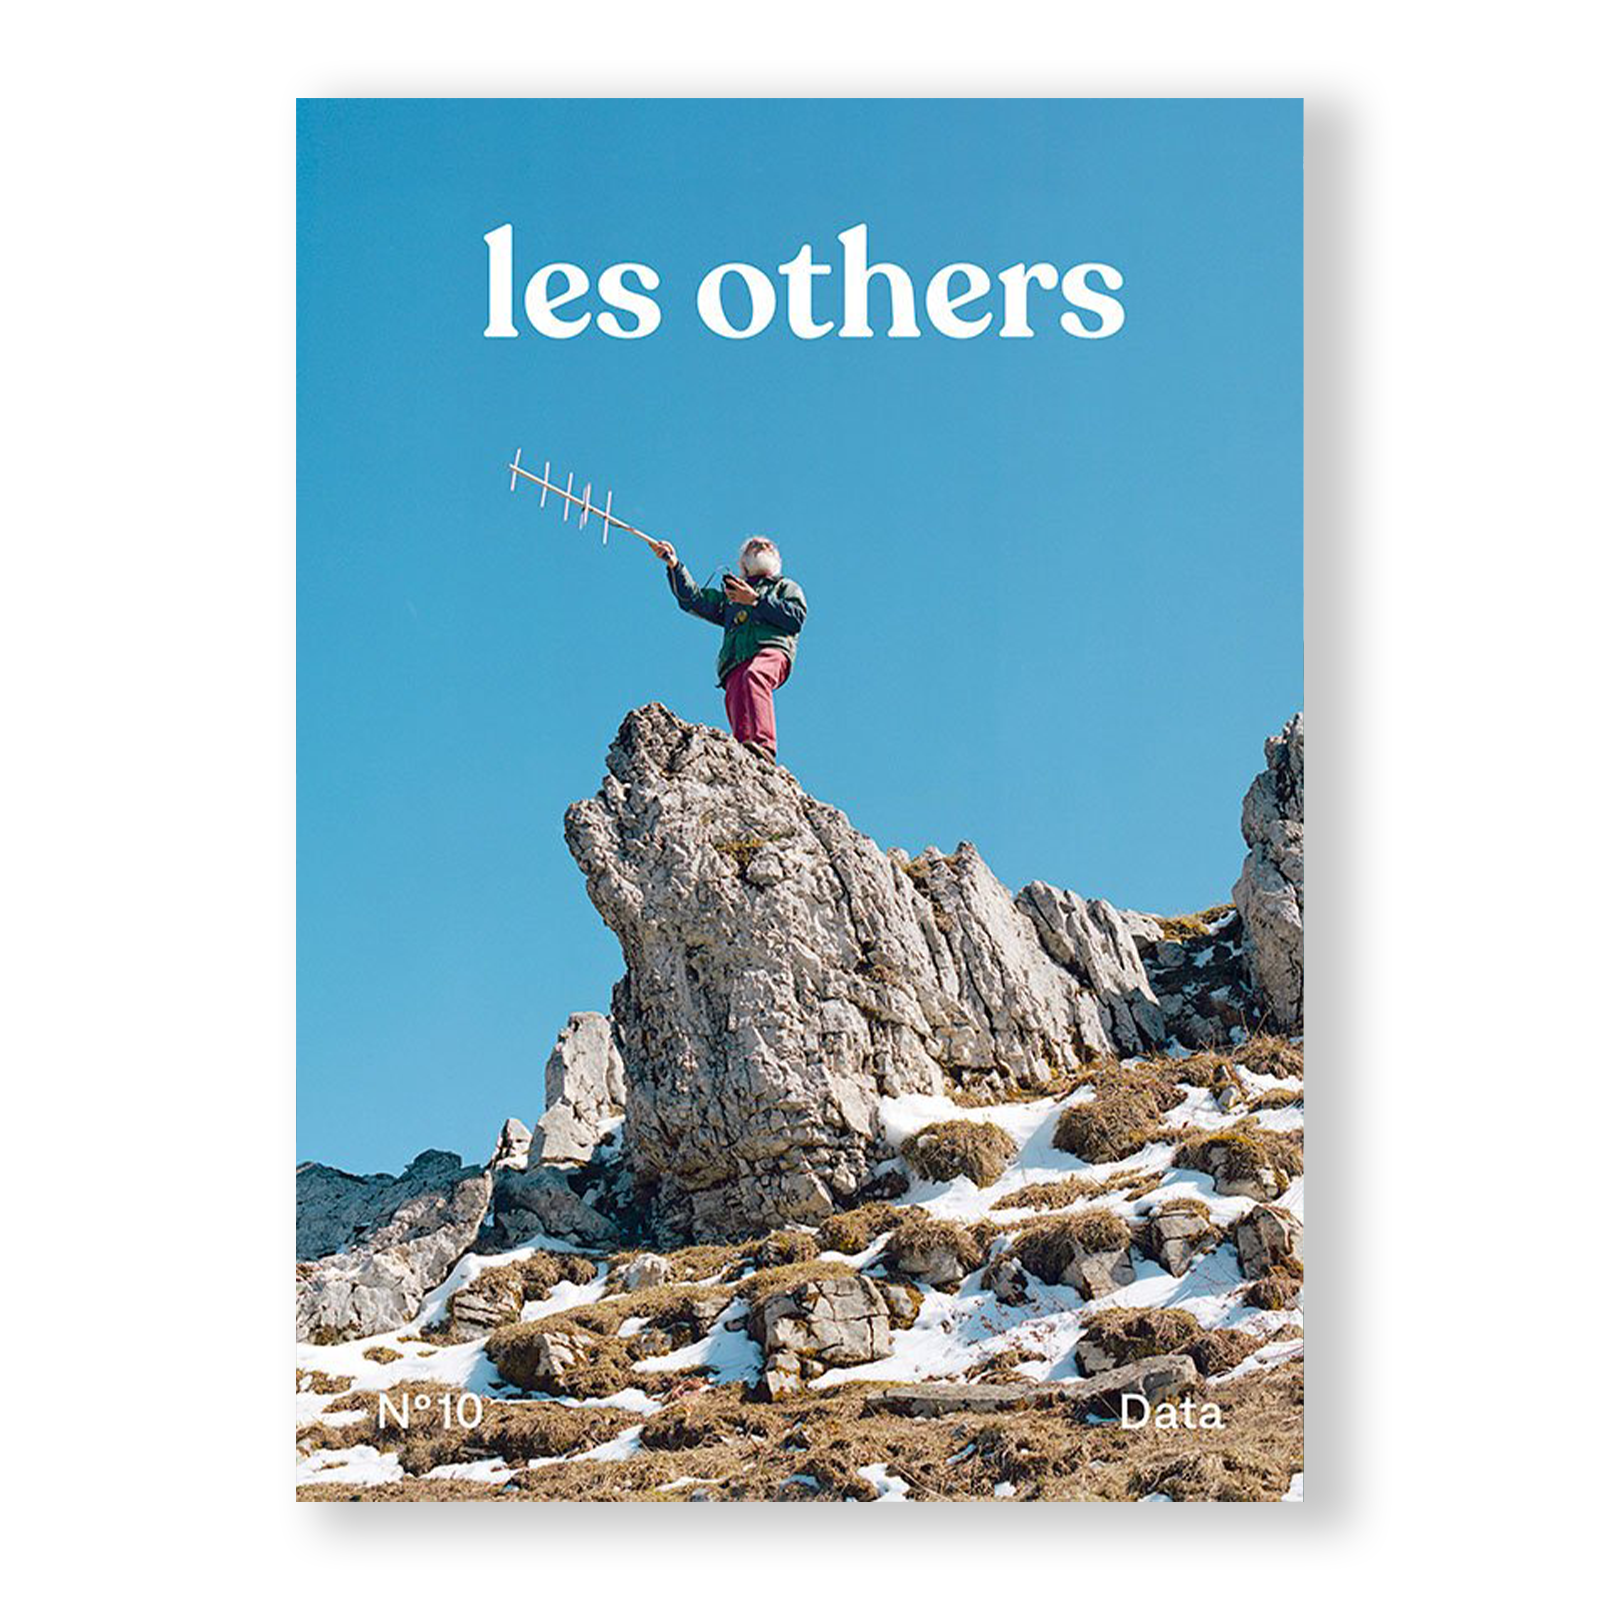 les others - Data (volume 10)